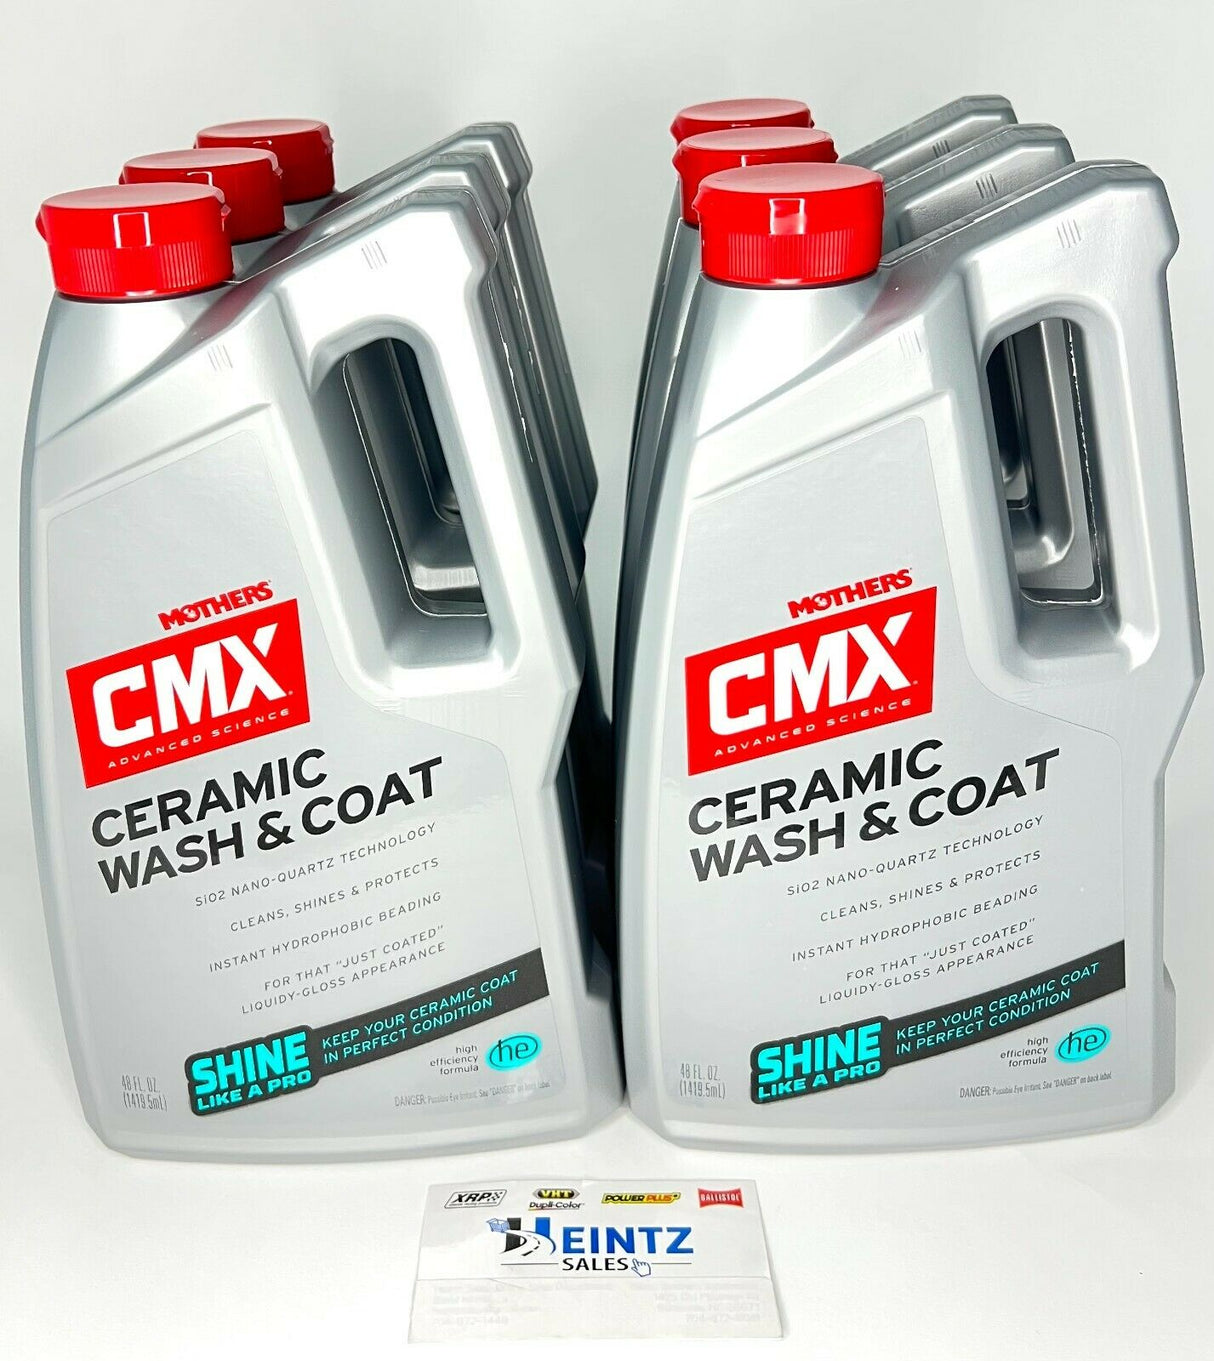 MOTHERS 01548 CMX Ceramic Wash and Coat 6 PACK - Clean - Shines - Protects - 48 oz.